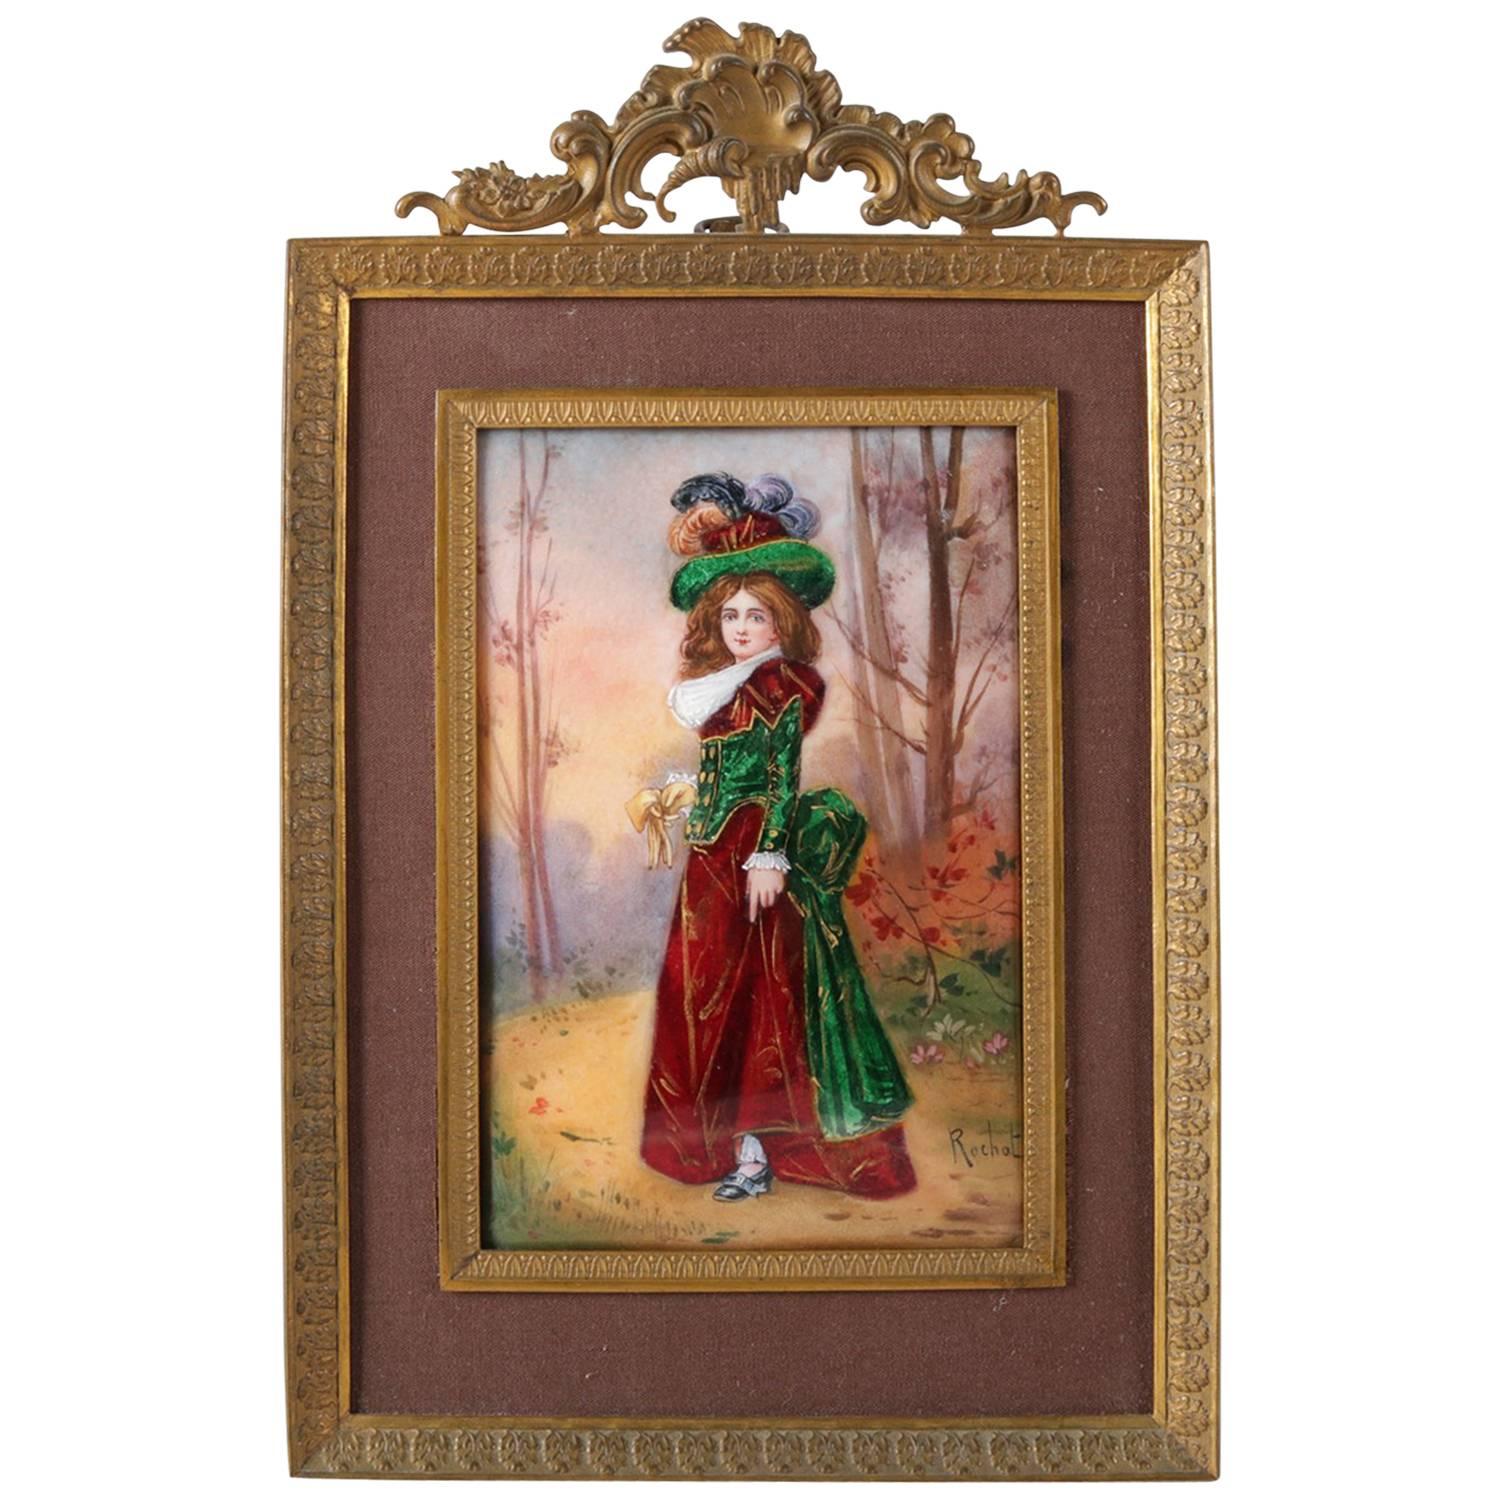 French Victorian Enamel on Copper Gibson Girl Portrait Plaque, Signed Rochat